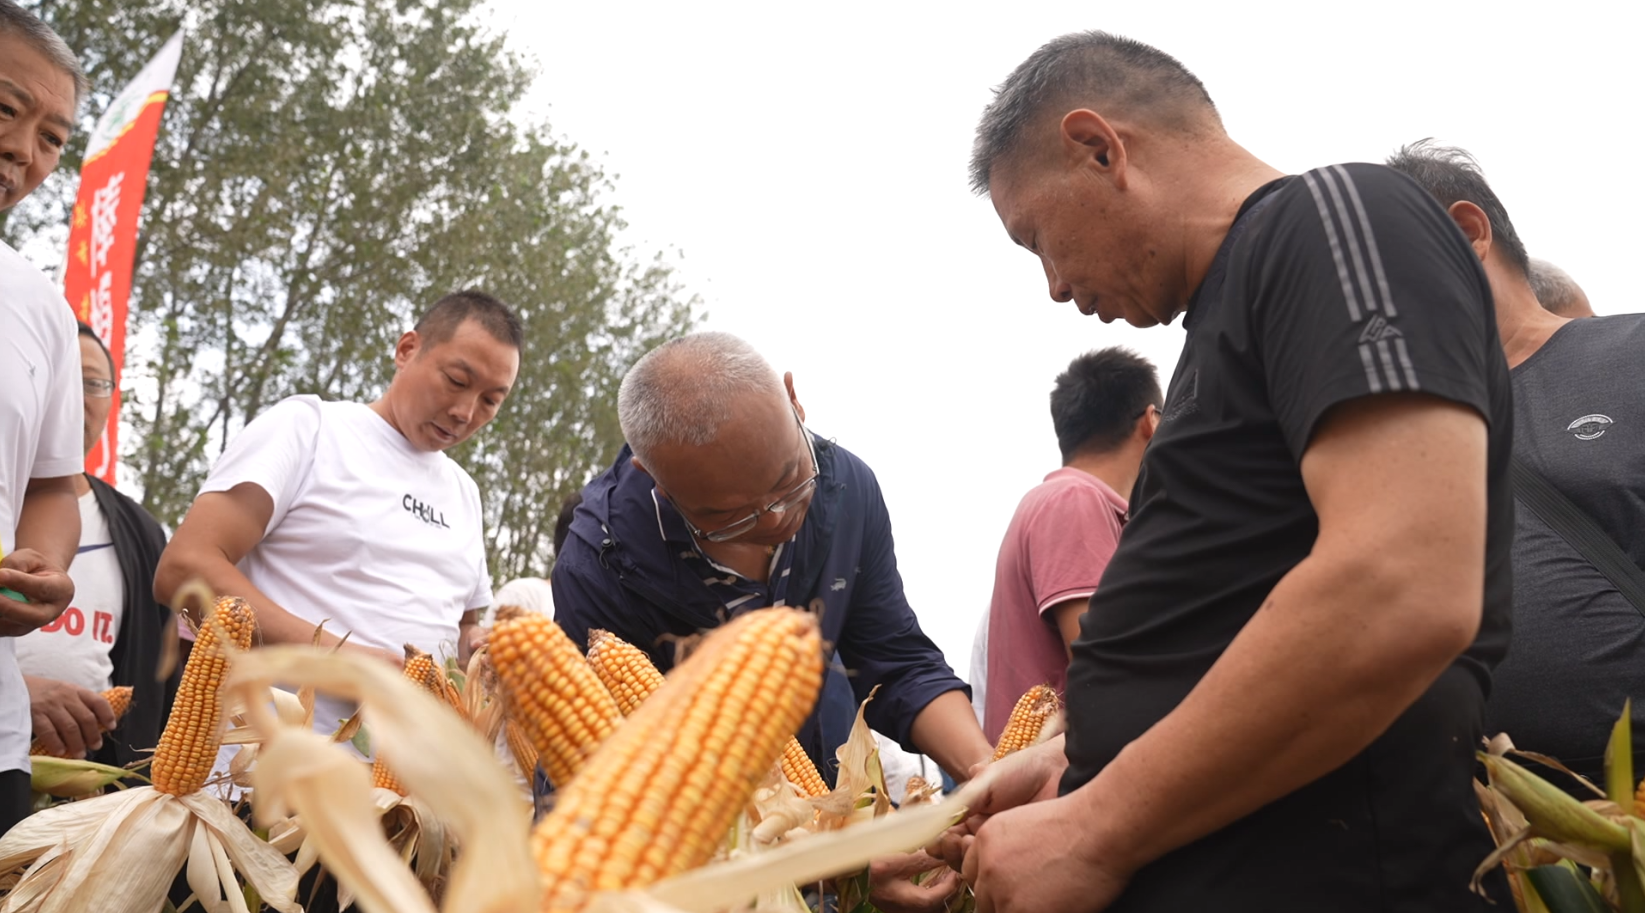  Good harvest is in the offing and preparations are in place for the third autumn. Corn planting and yield measurement in Runan County are carried out in an orderly manner